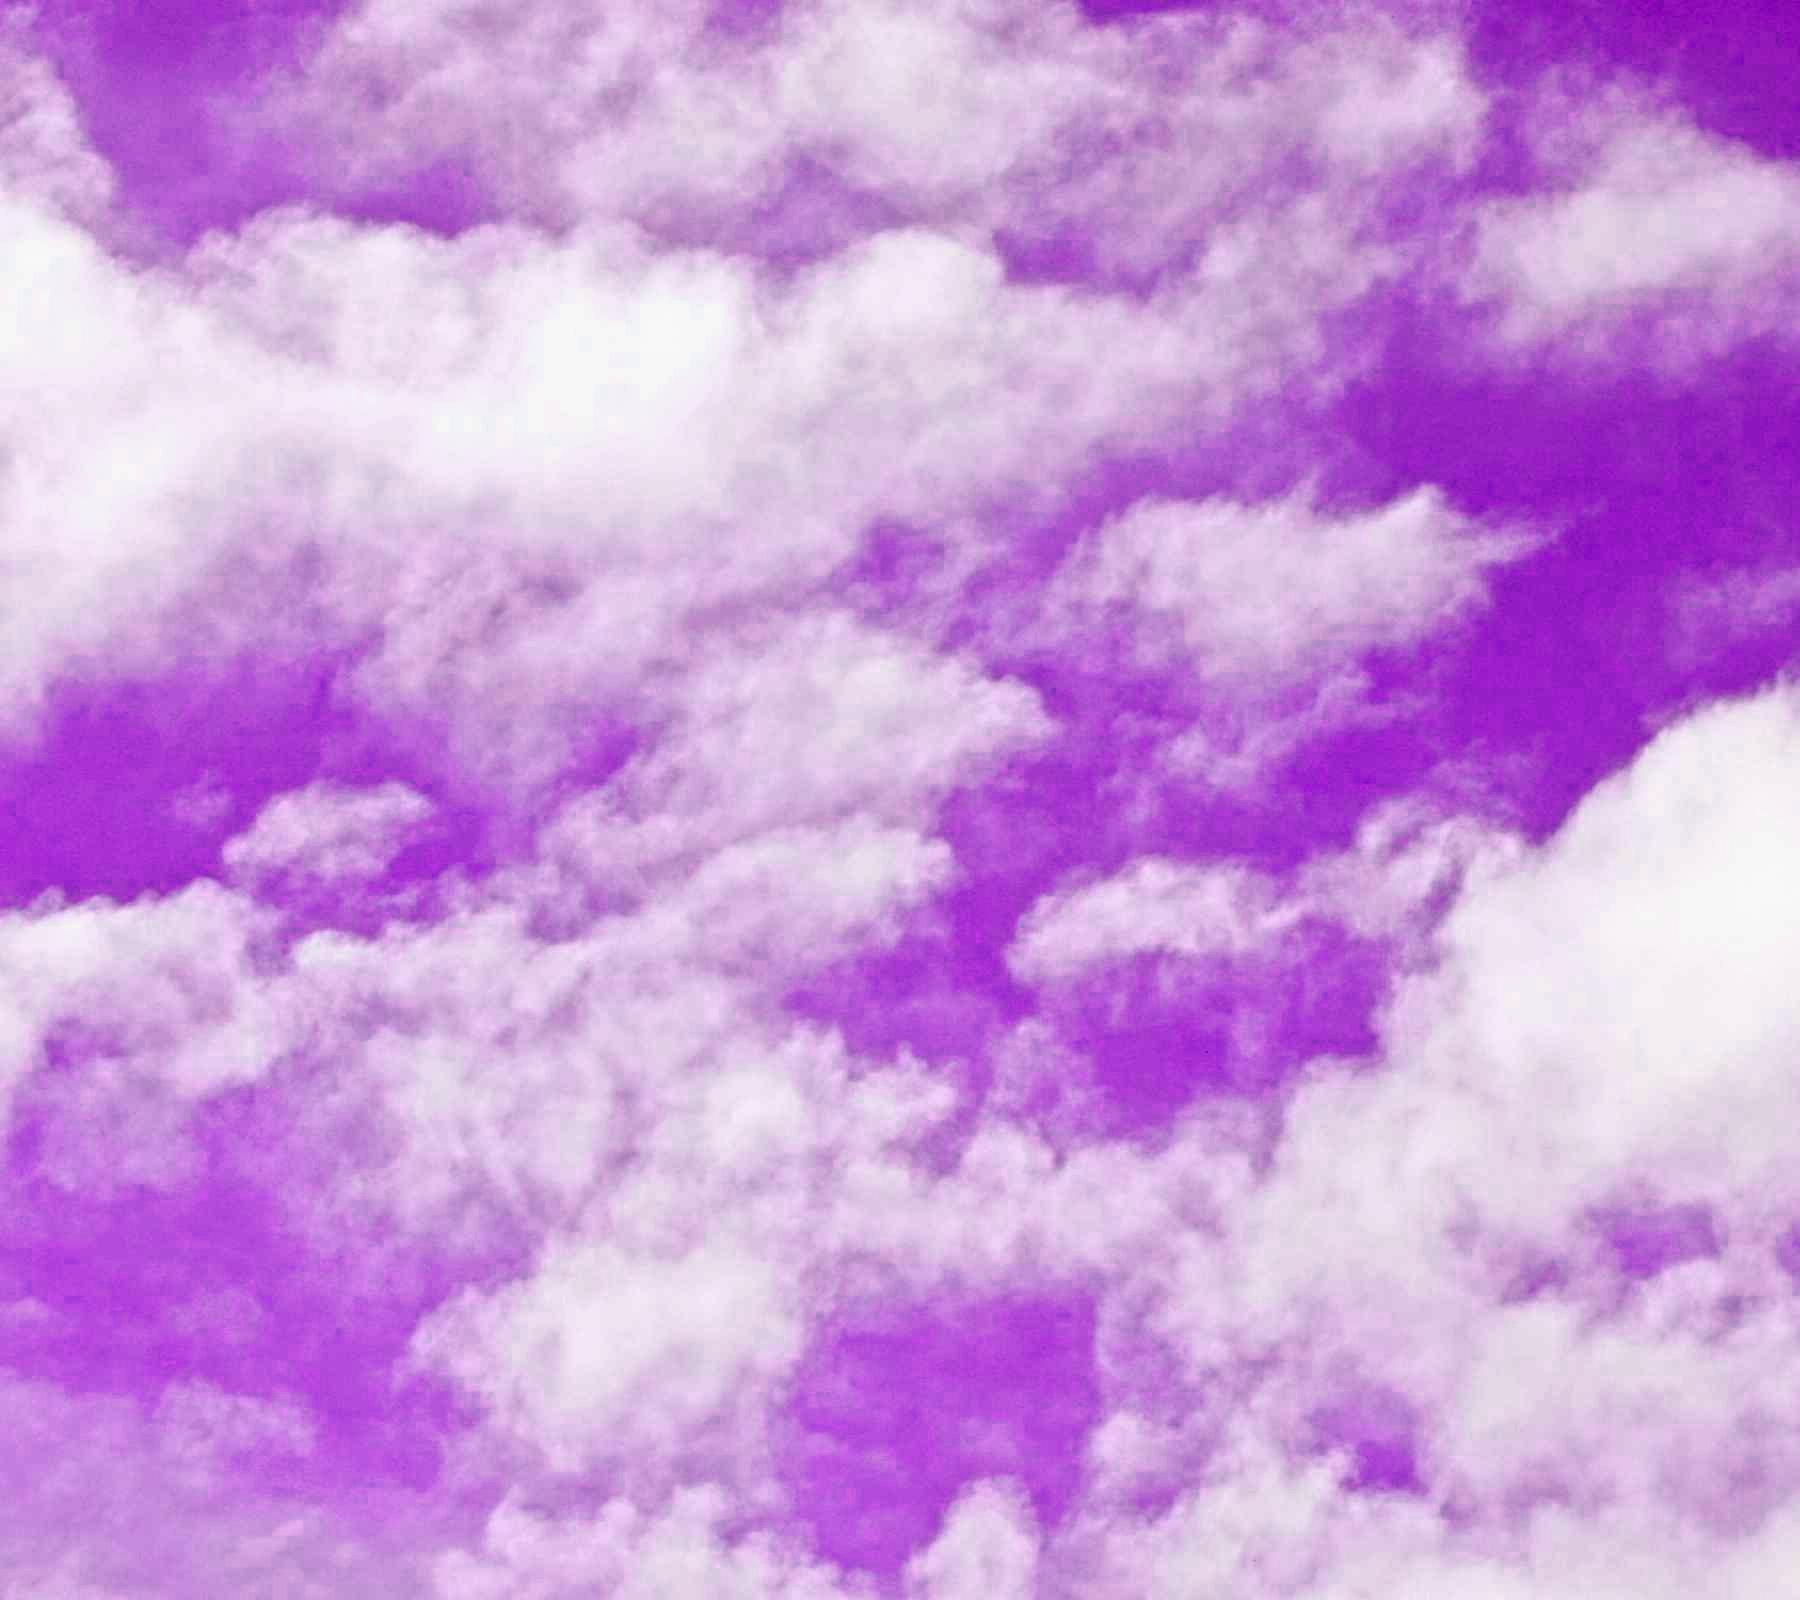 Background Wallpaper Image Purple Sky With Clouds